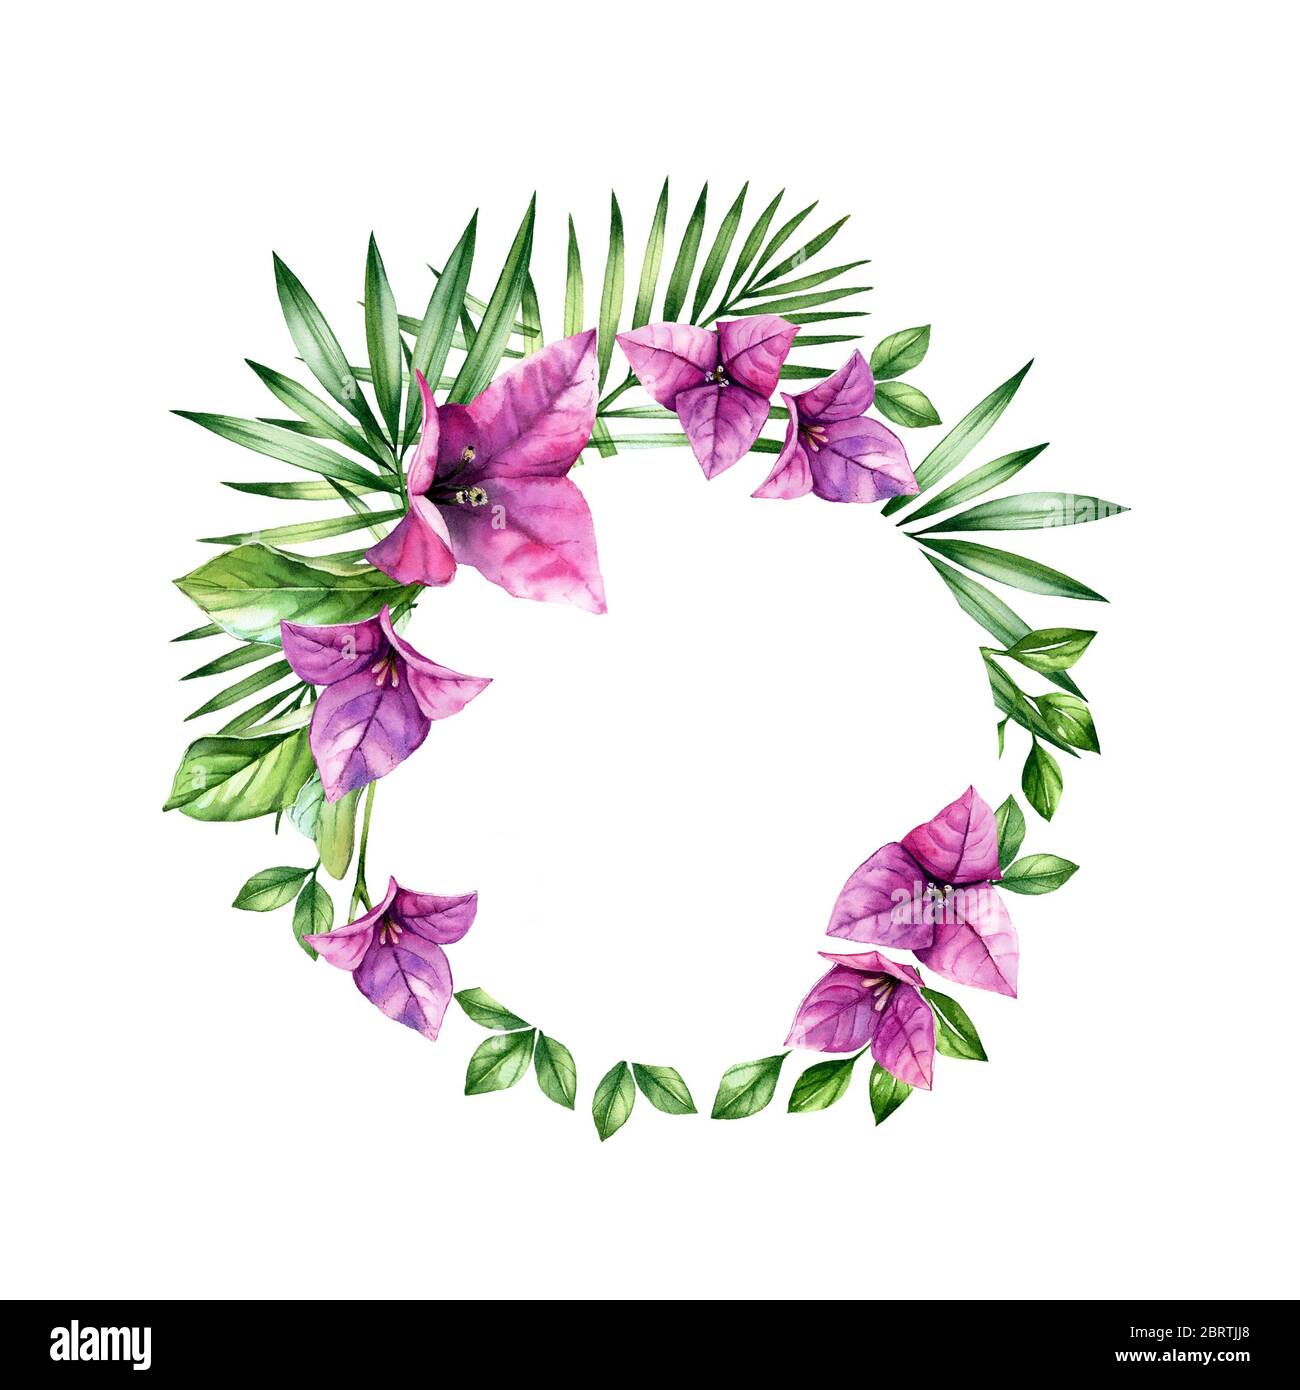 Watercolor floral wreath. Round frame and place for text. Purple bougainvillea flowers. Tropical banner template isolated on white for logo, wedding, Stock Photo